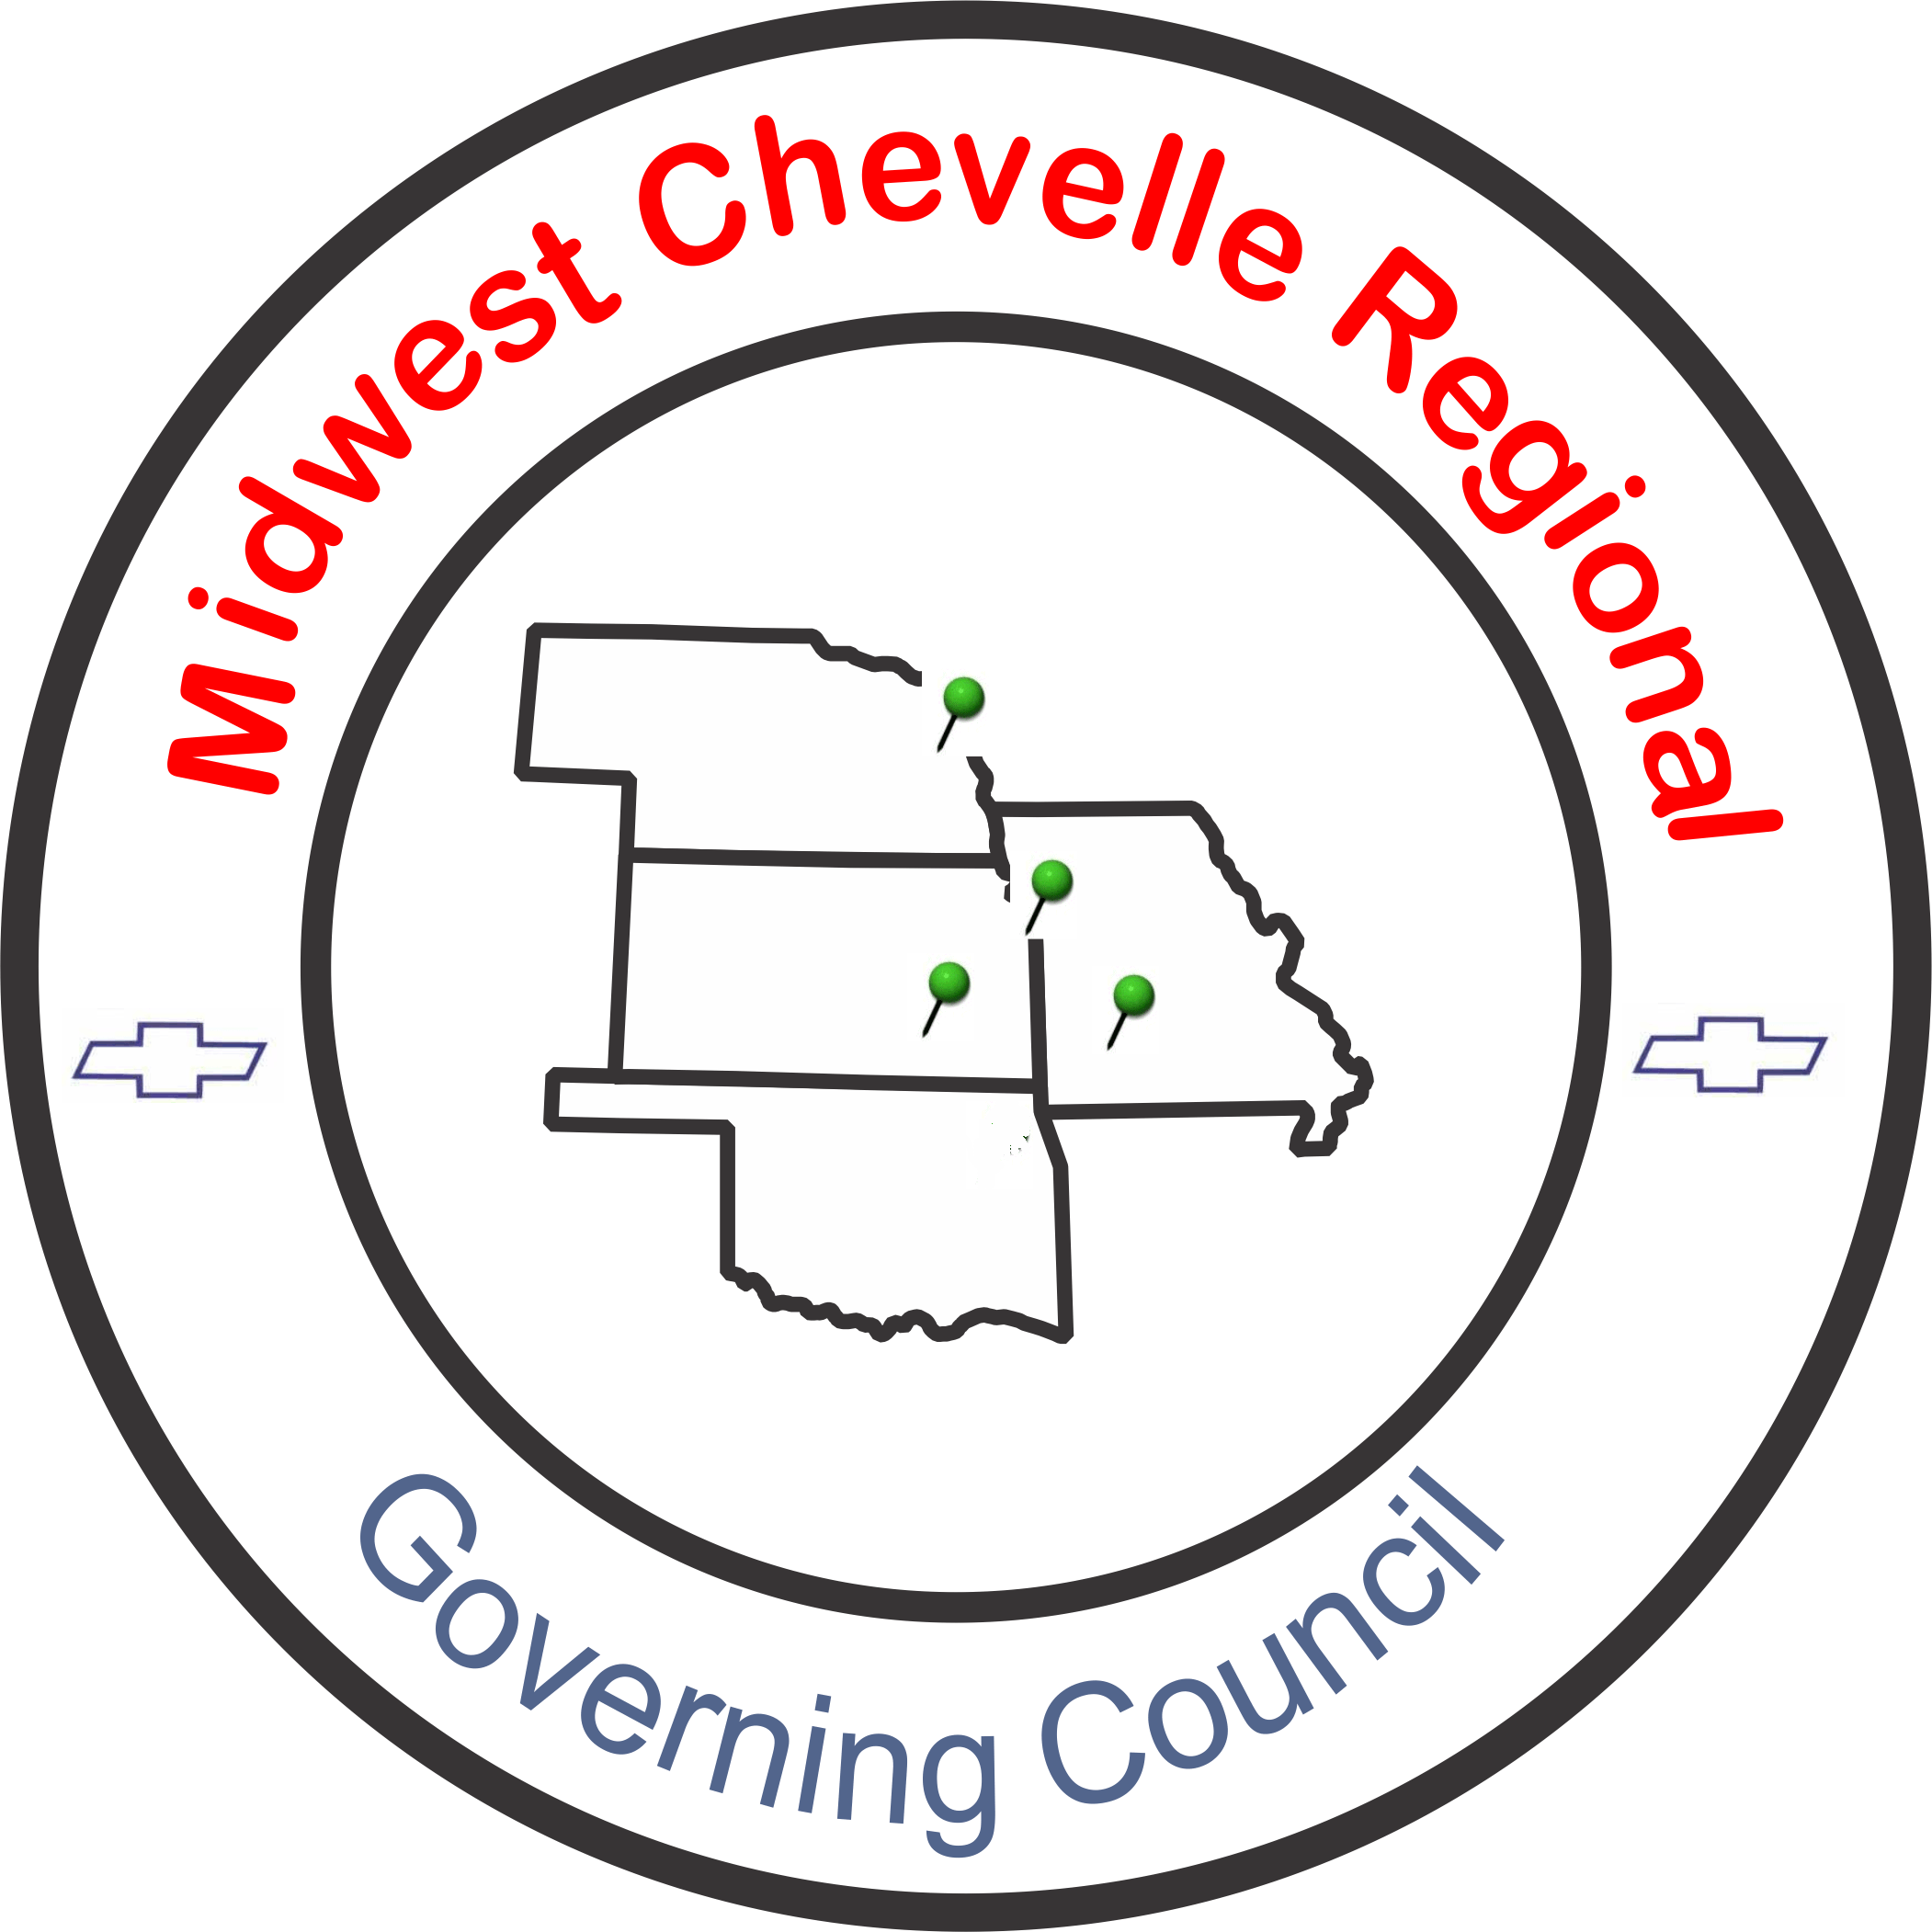 Midwest Chevelle Regional Governing Council